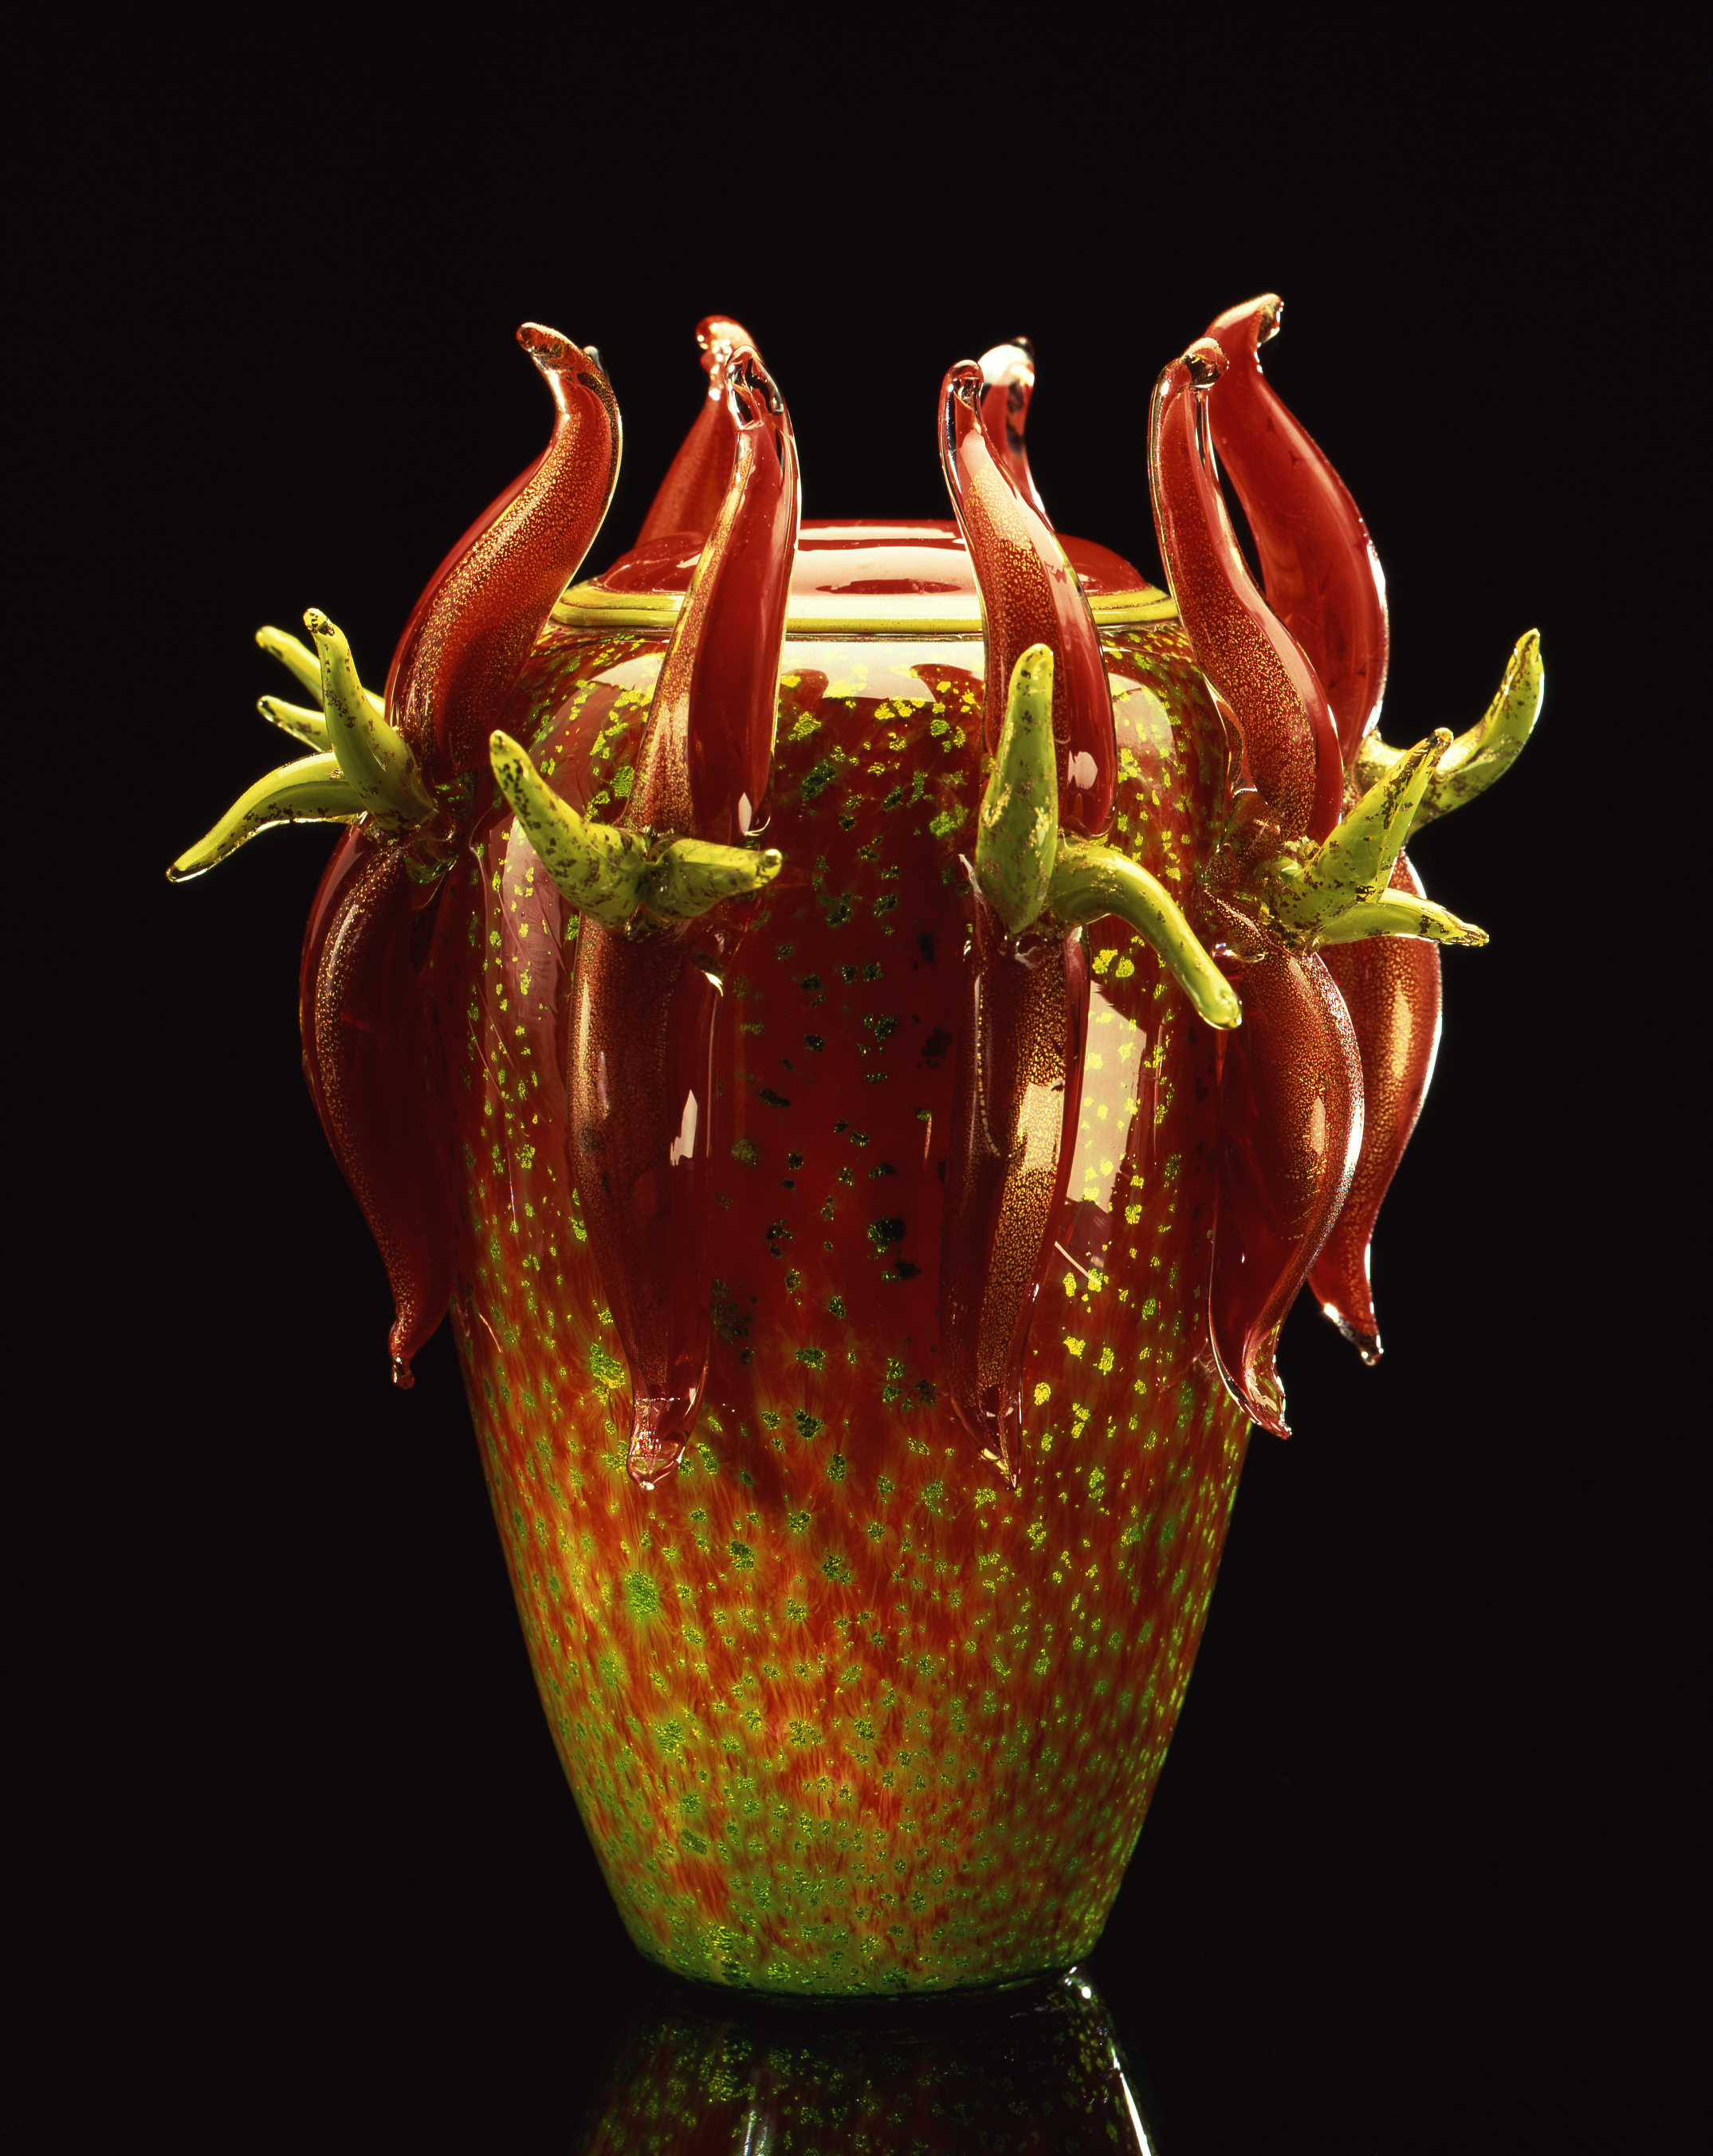  Dale Chihuly,  Green and Red Piccolo Venetian with Red Handles&nbsp; (1990, glass, 9 x 7 x 7&nbsp;inches) 